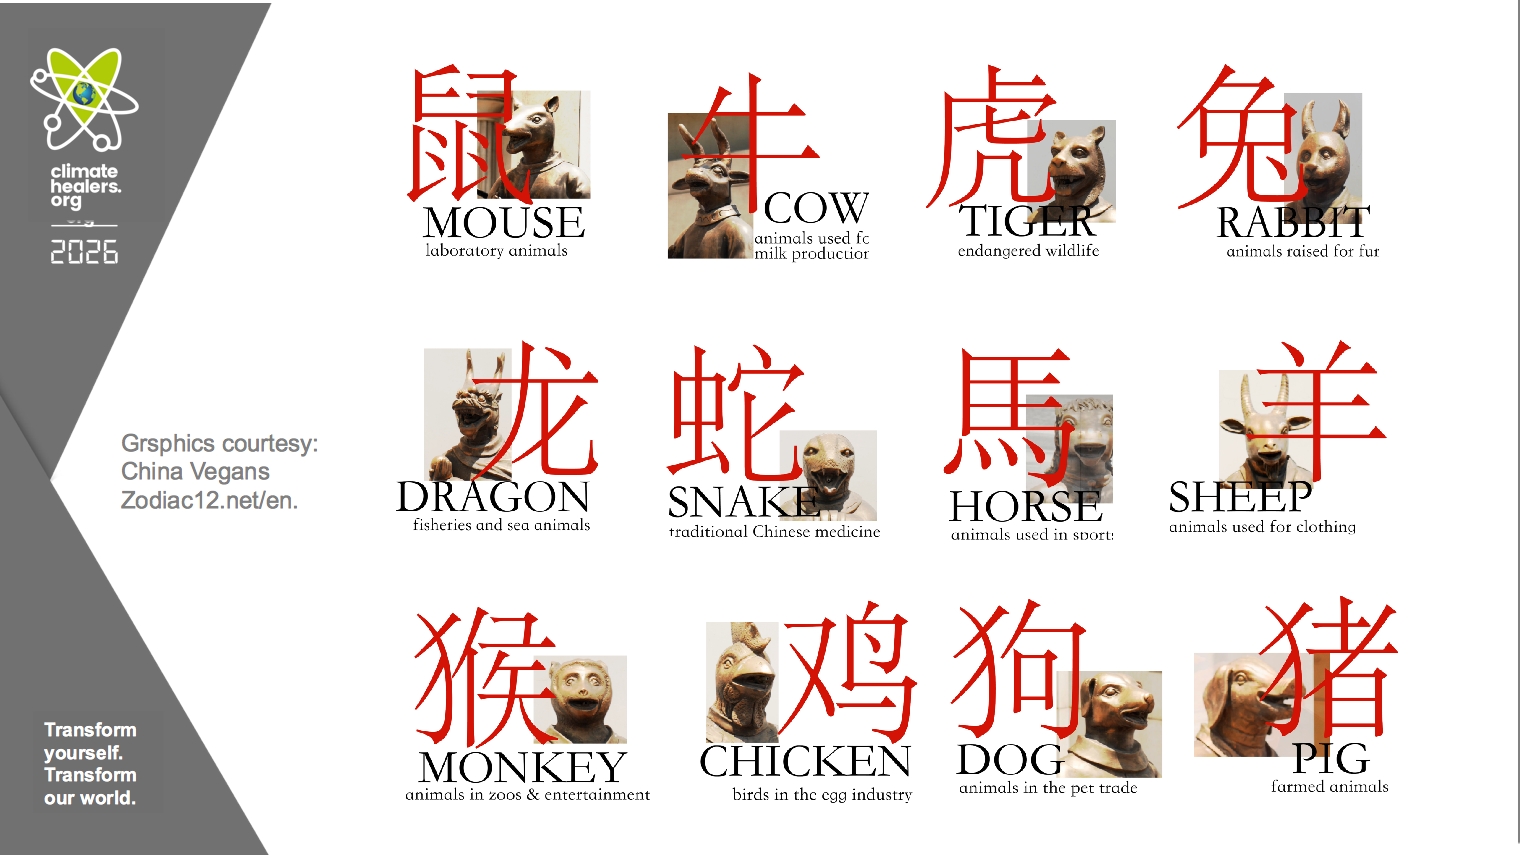 the chinese zodiac and its association with animal use